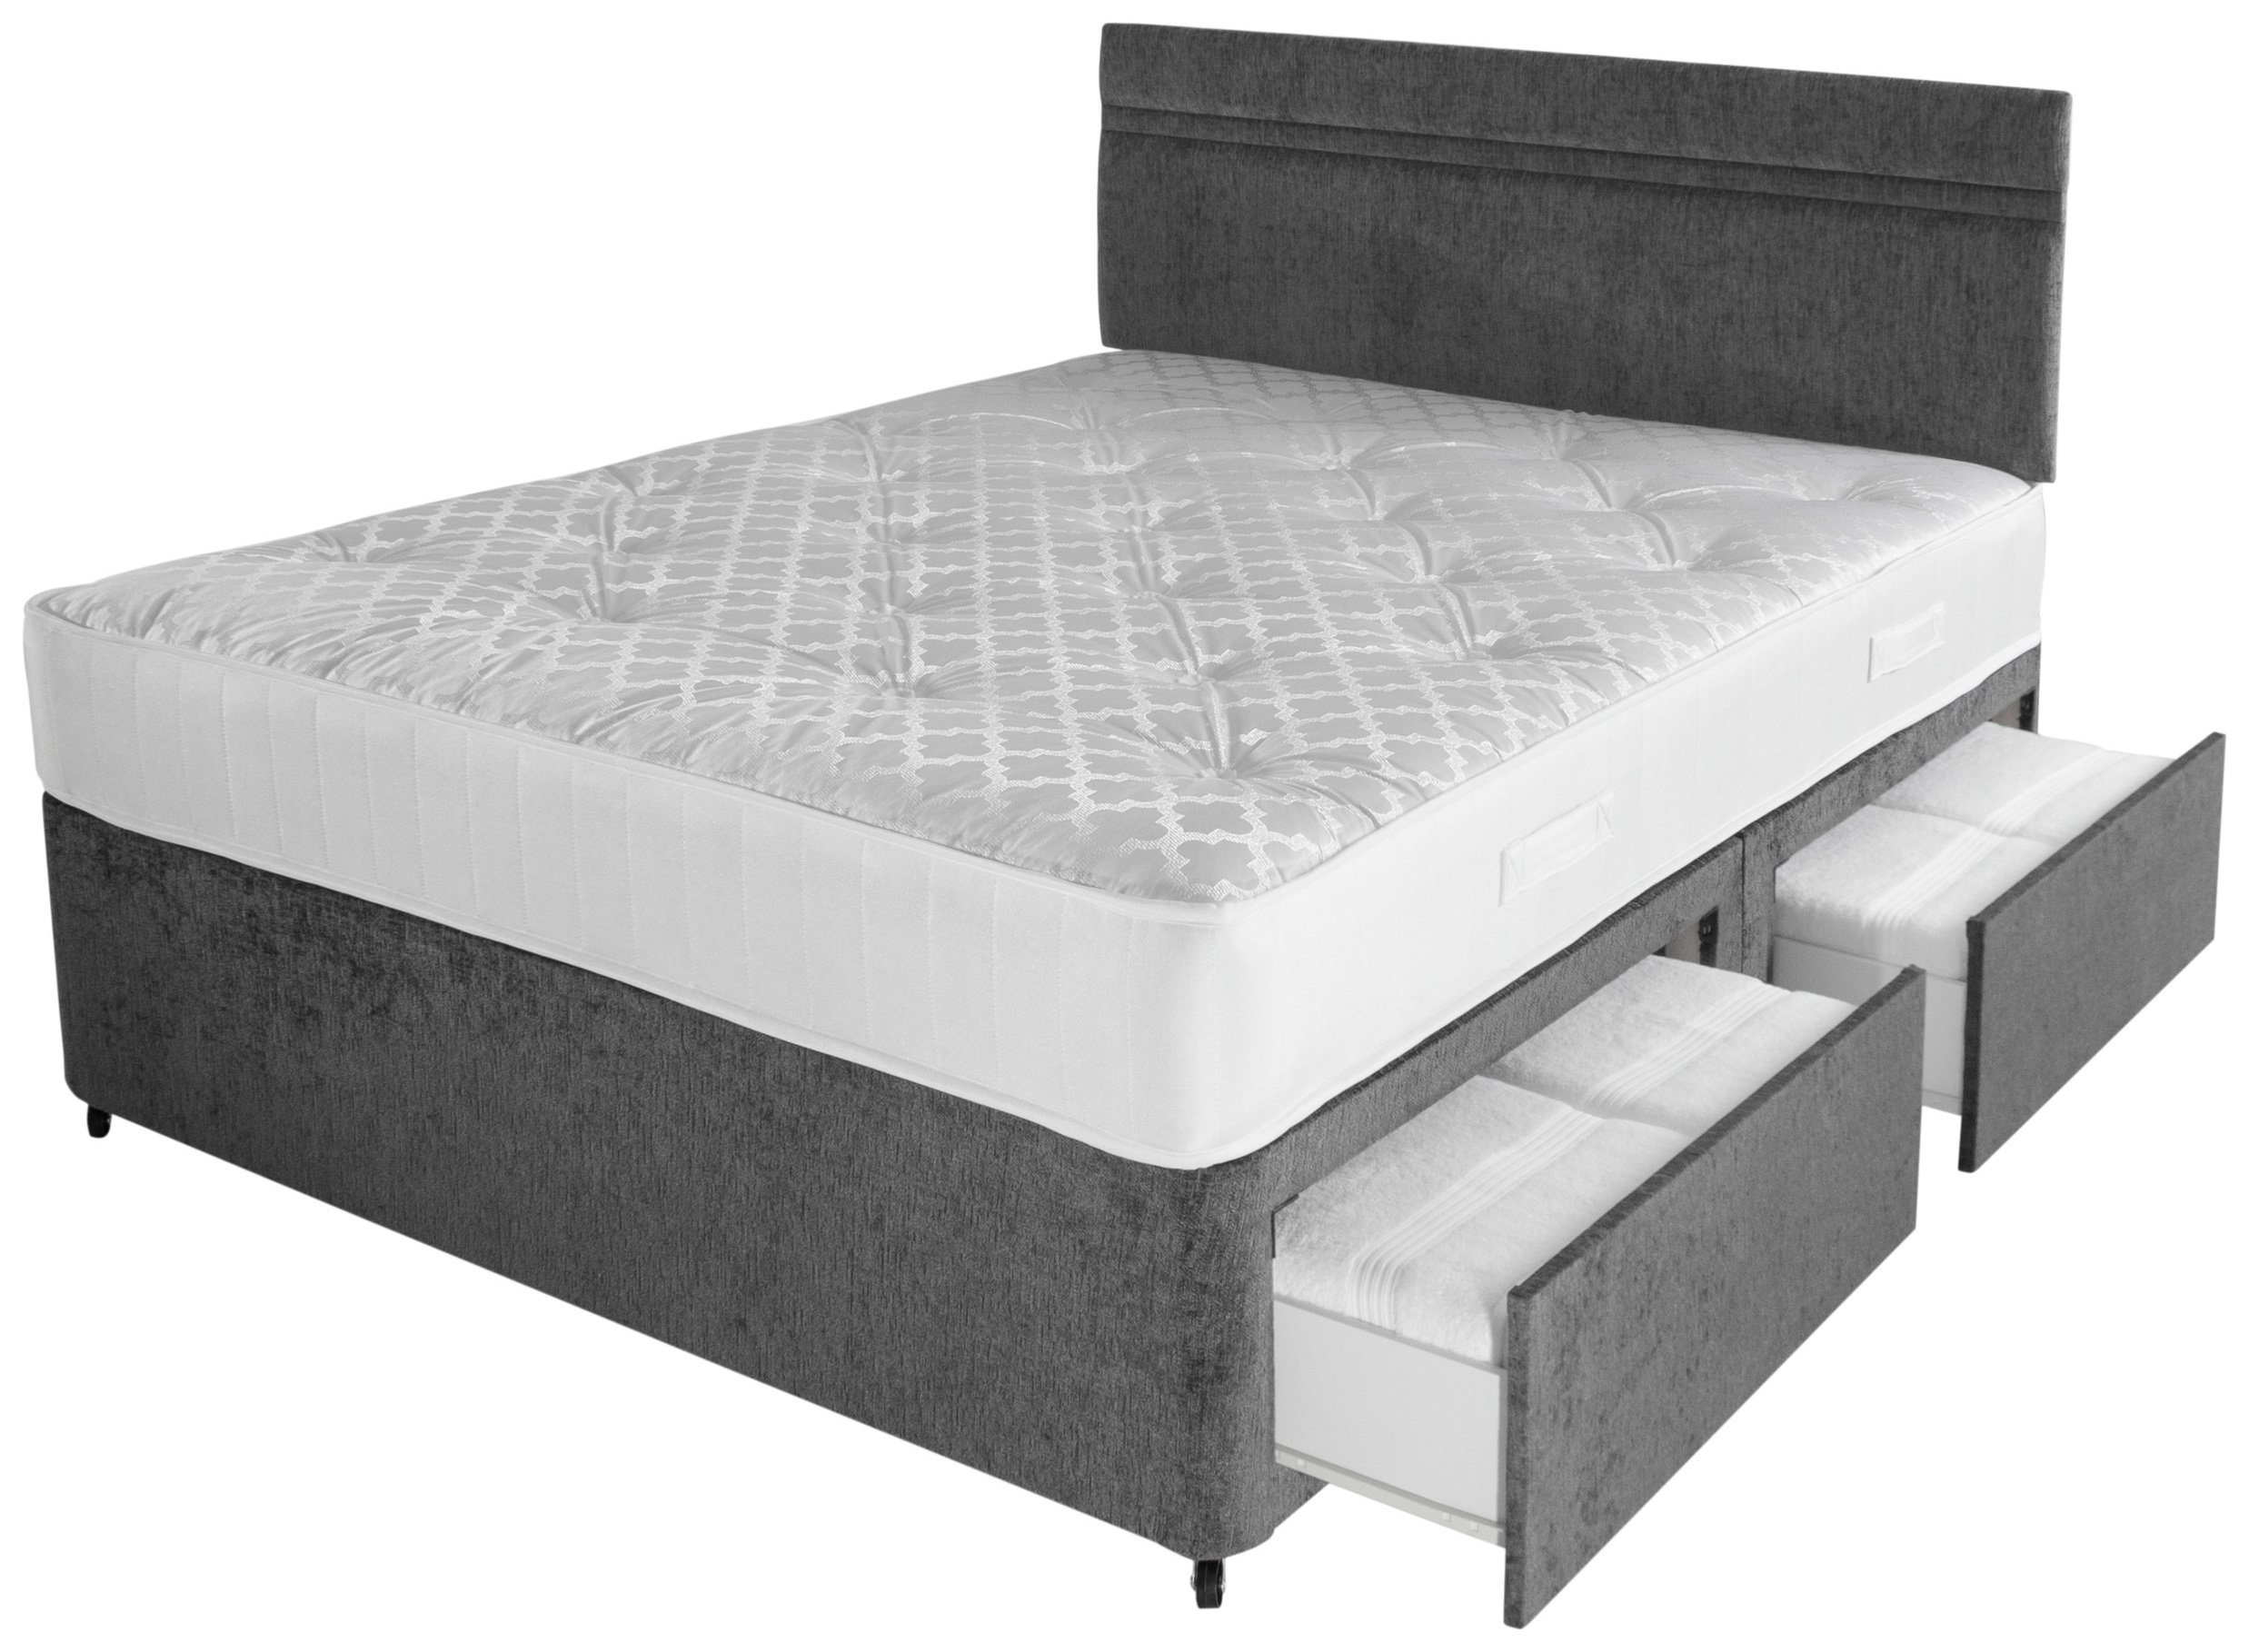 Best Of 57+ Breathtaking airsprung hybrid 2400 pocket king size mattress reviews Trend Of The Year